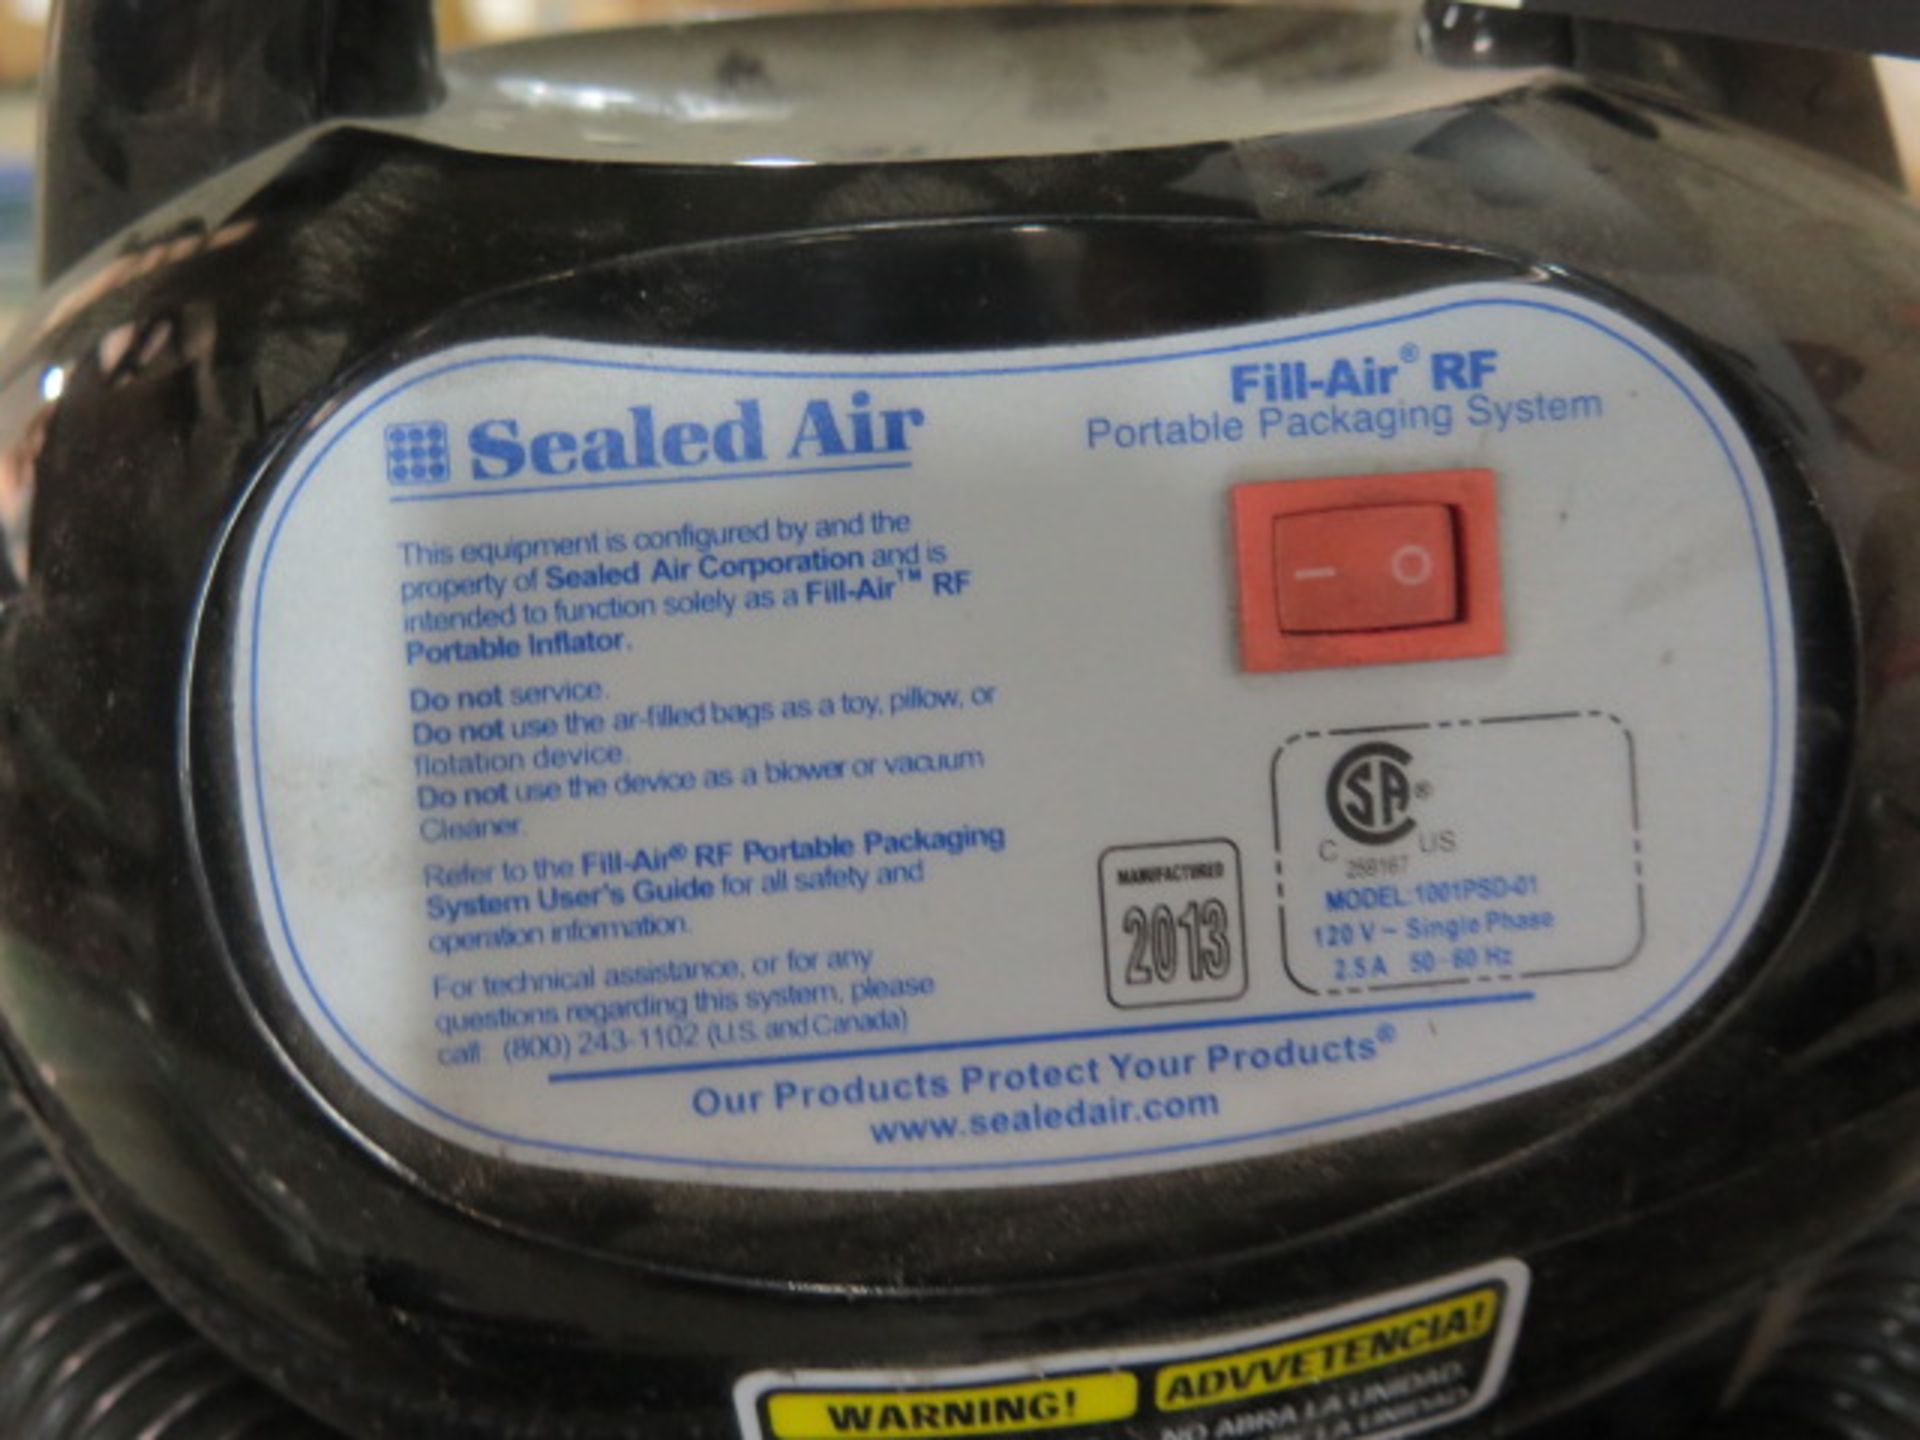 Sealed Air "Fill-Air RF" Portable Packaging System w/ Air Bags (SOLD AS-IS - NO WARRANTY) - Image 6 of 6